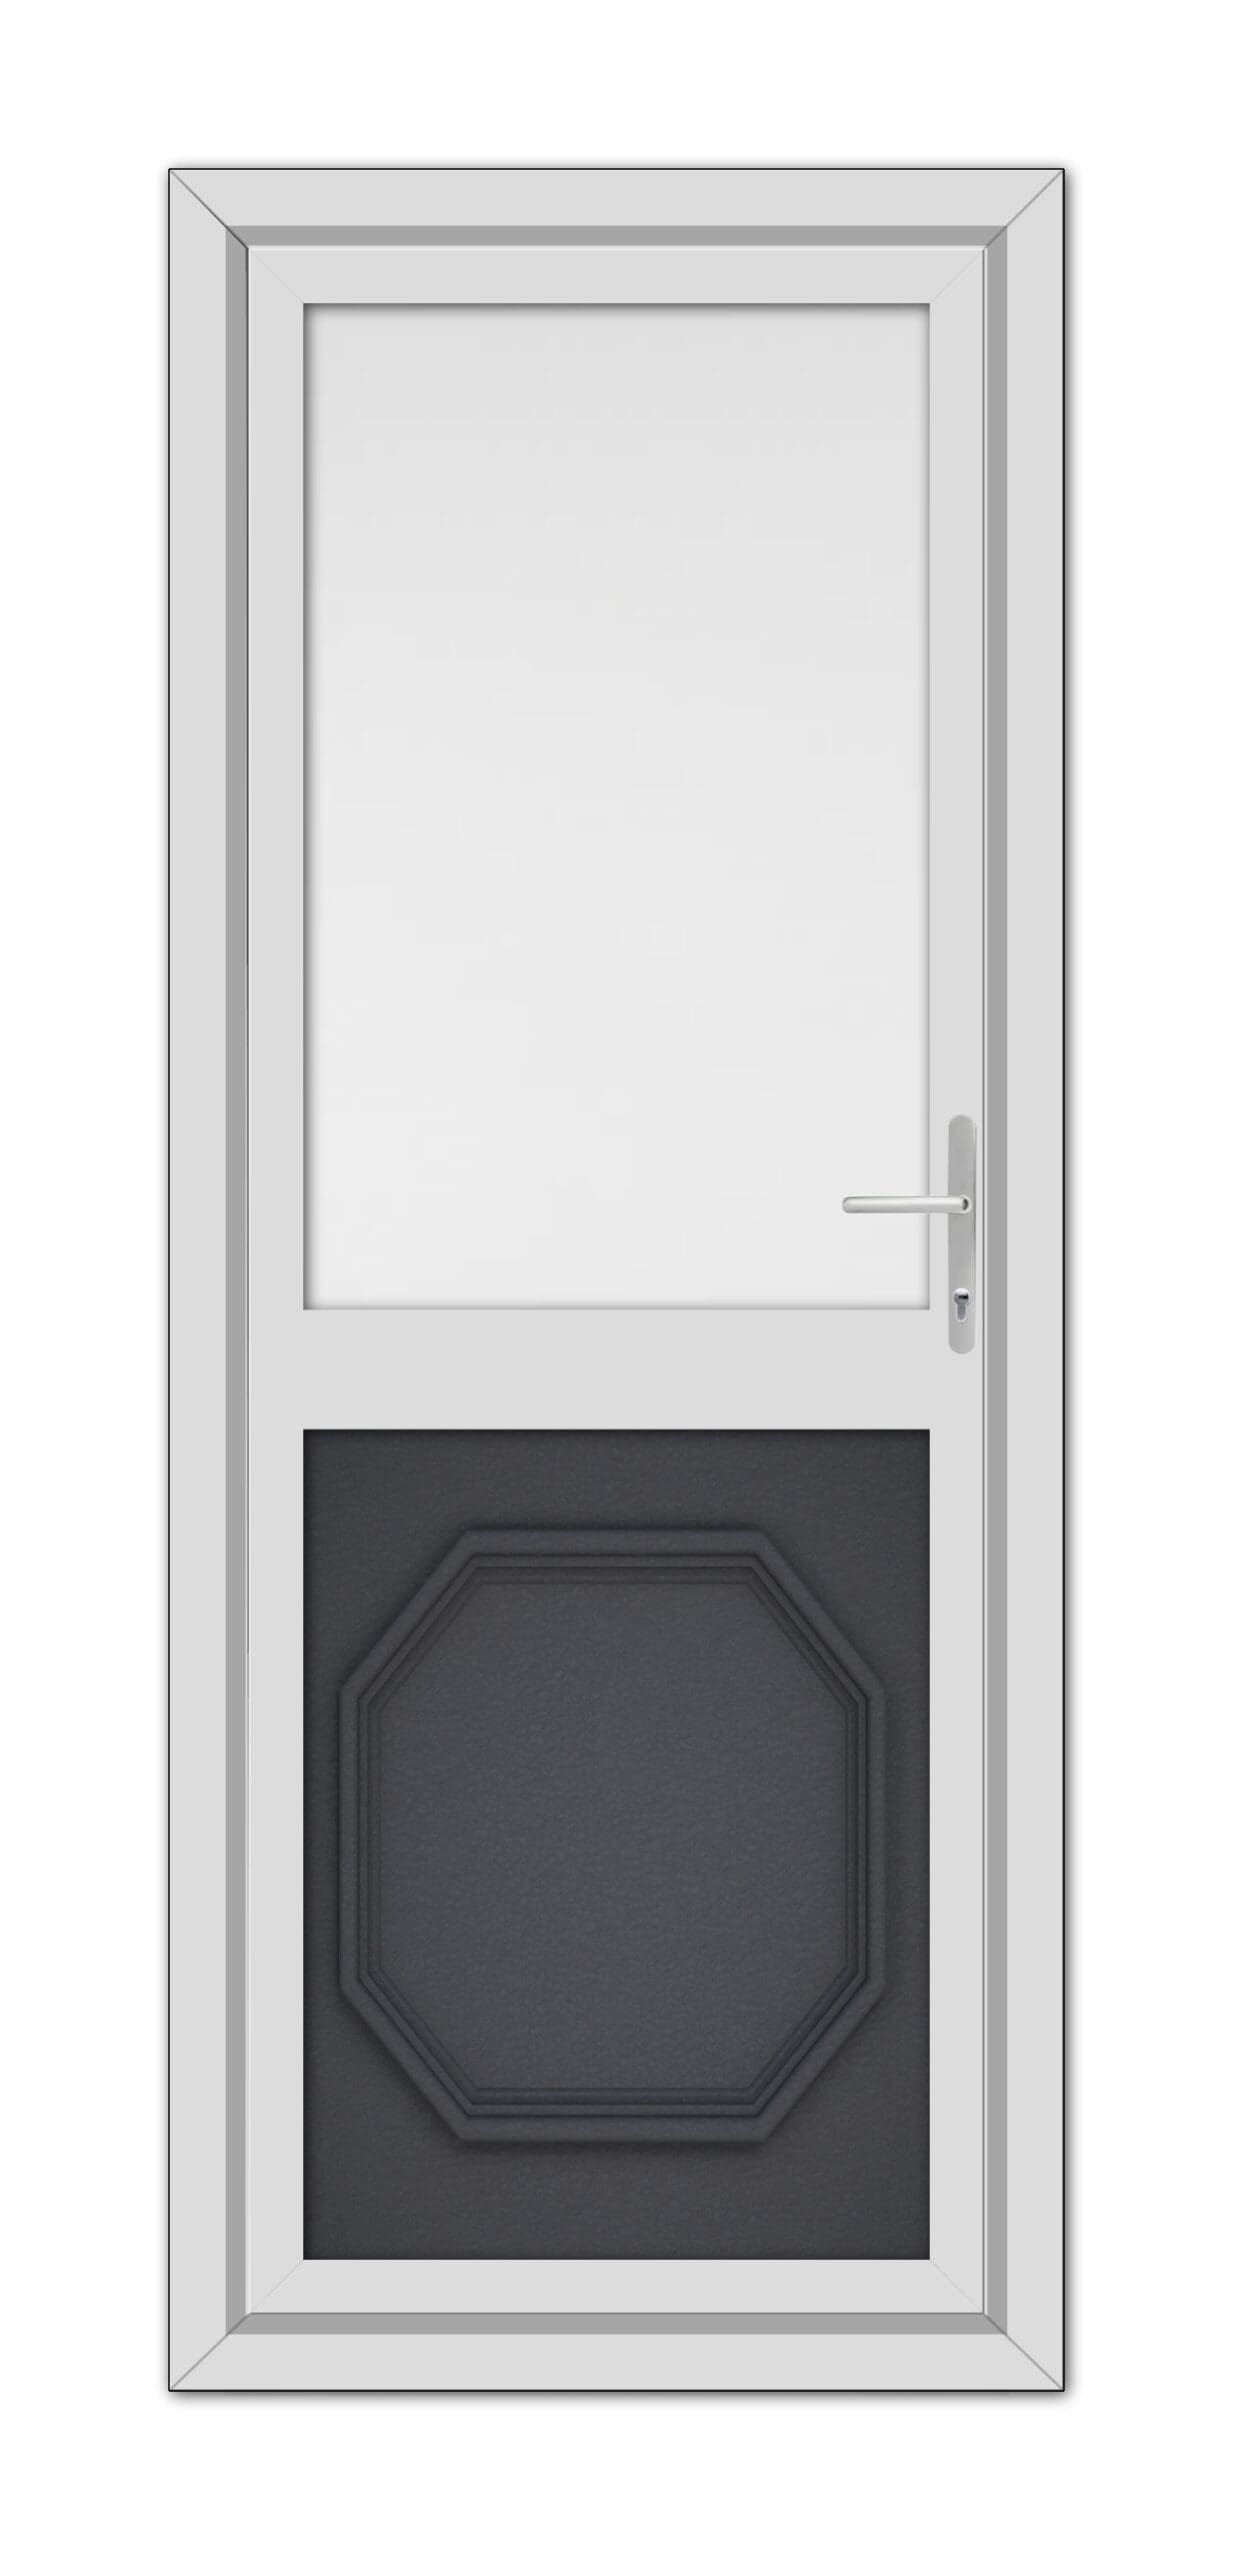 Grey Grained Buckingham Half uPVC Back Door with a geometrically patterned lower panel and a square window, featuring a sleek silver handle, isolated on a white background.